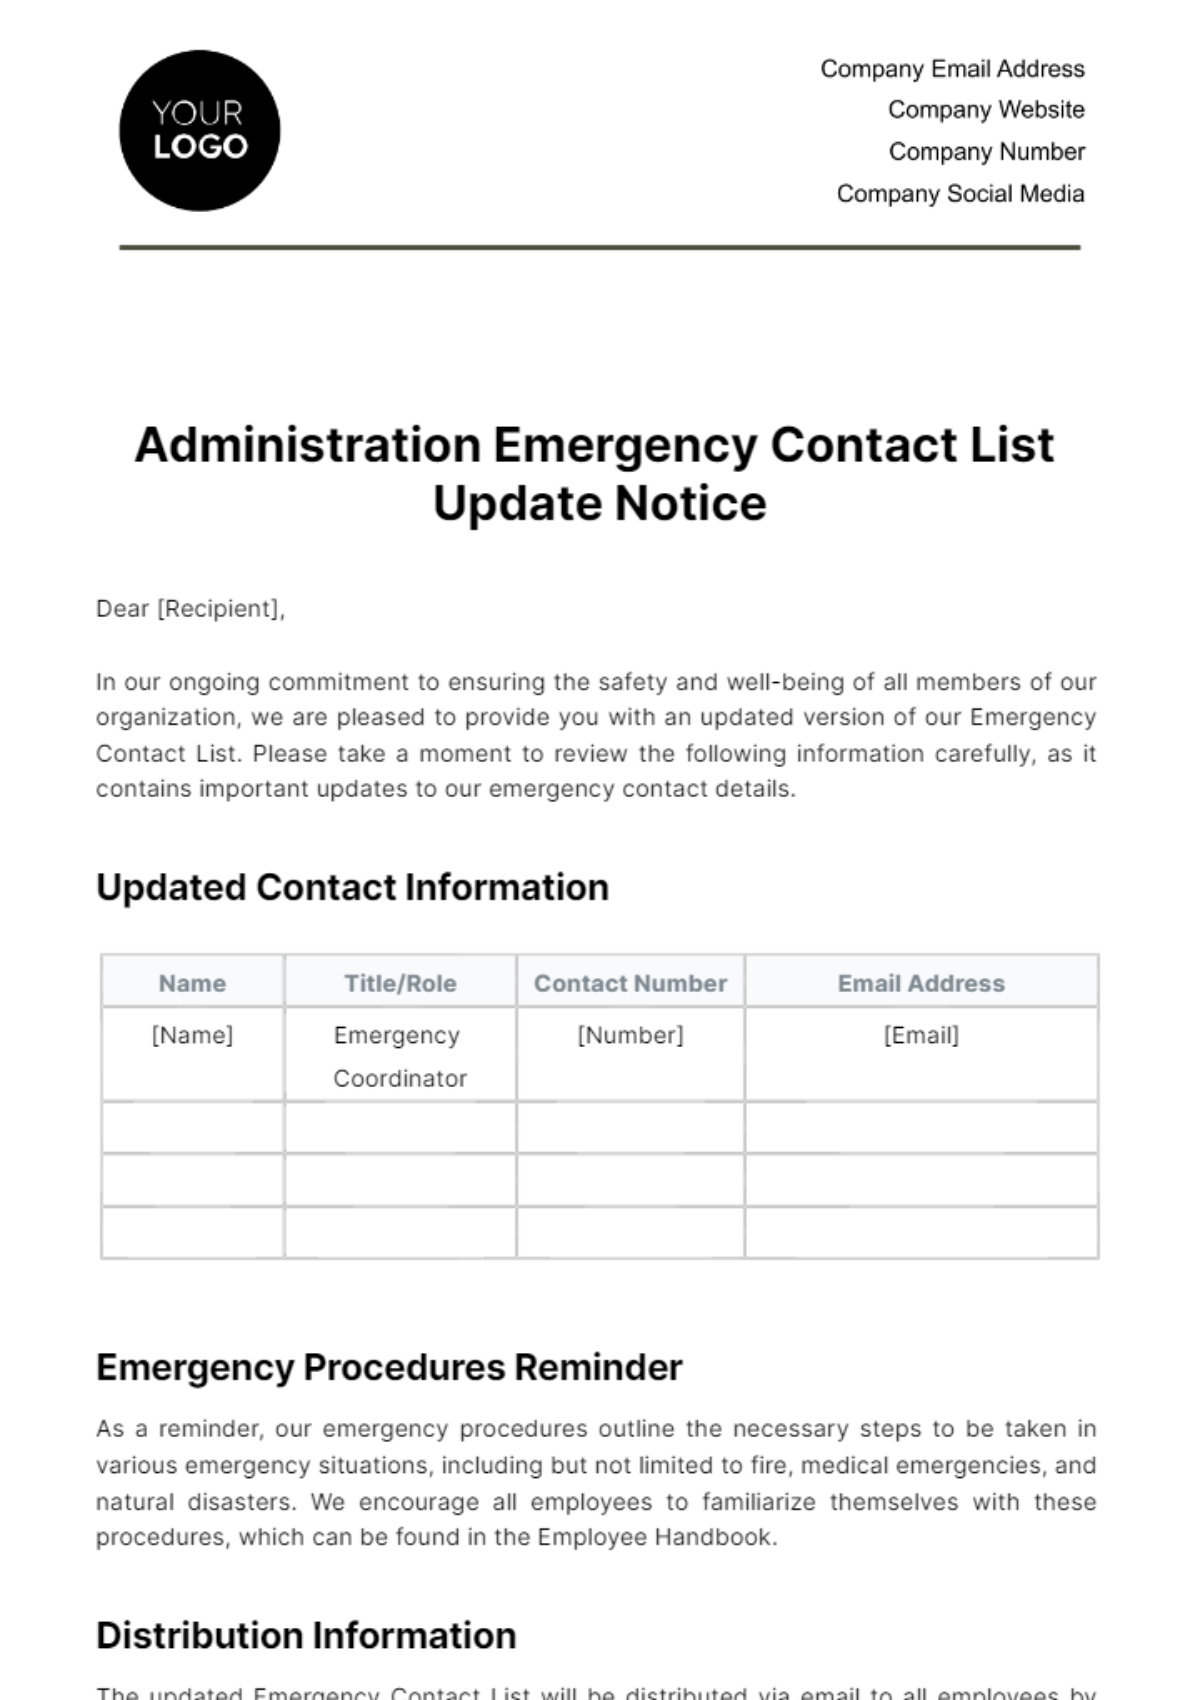 Administration Emergency Contact List Update Notice Template